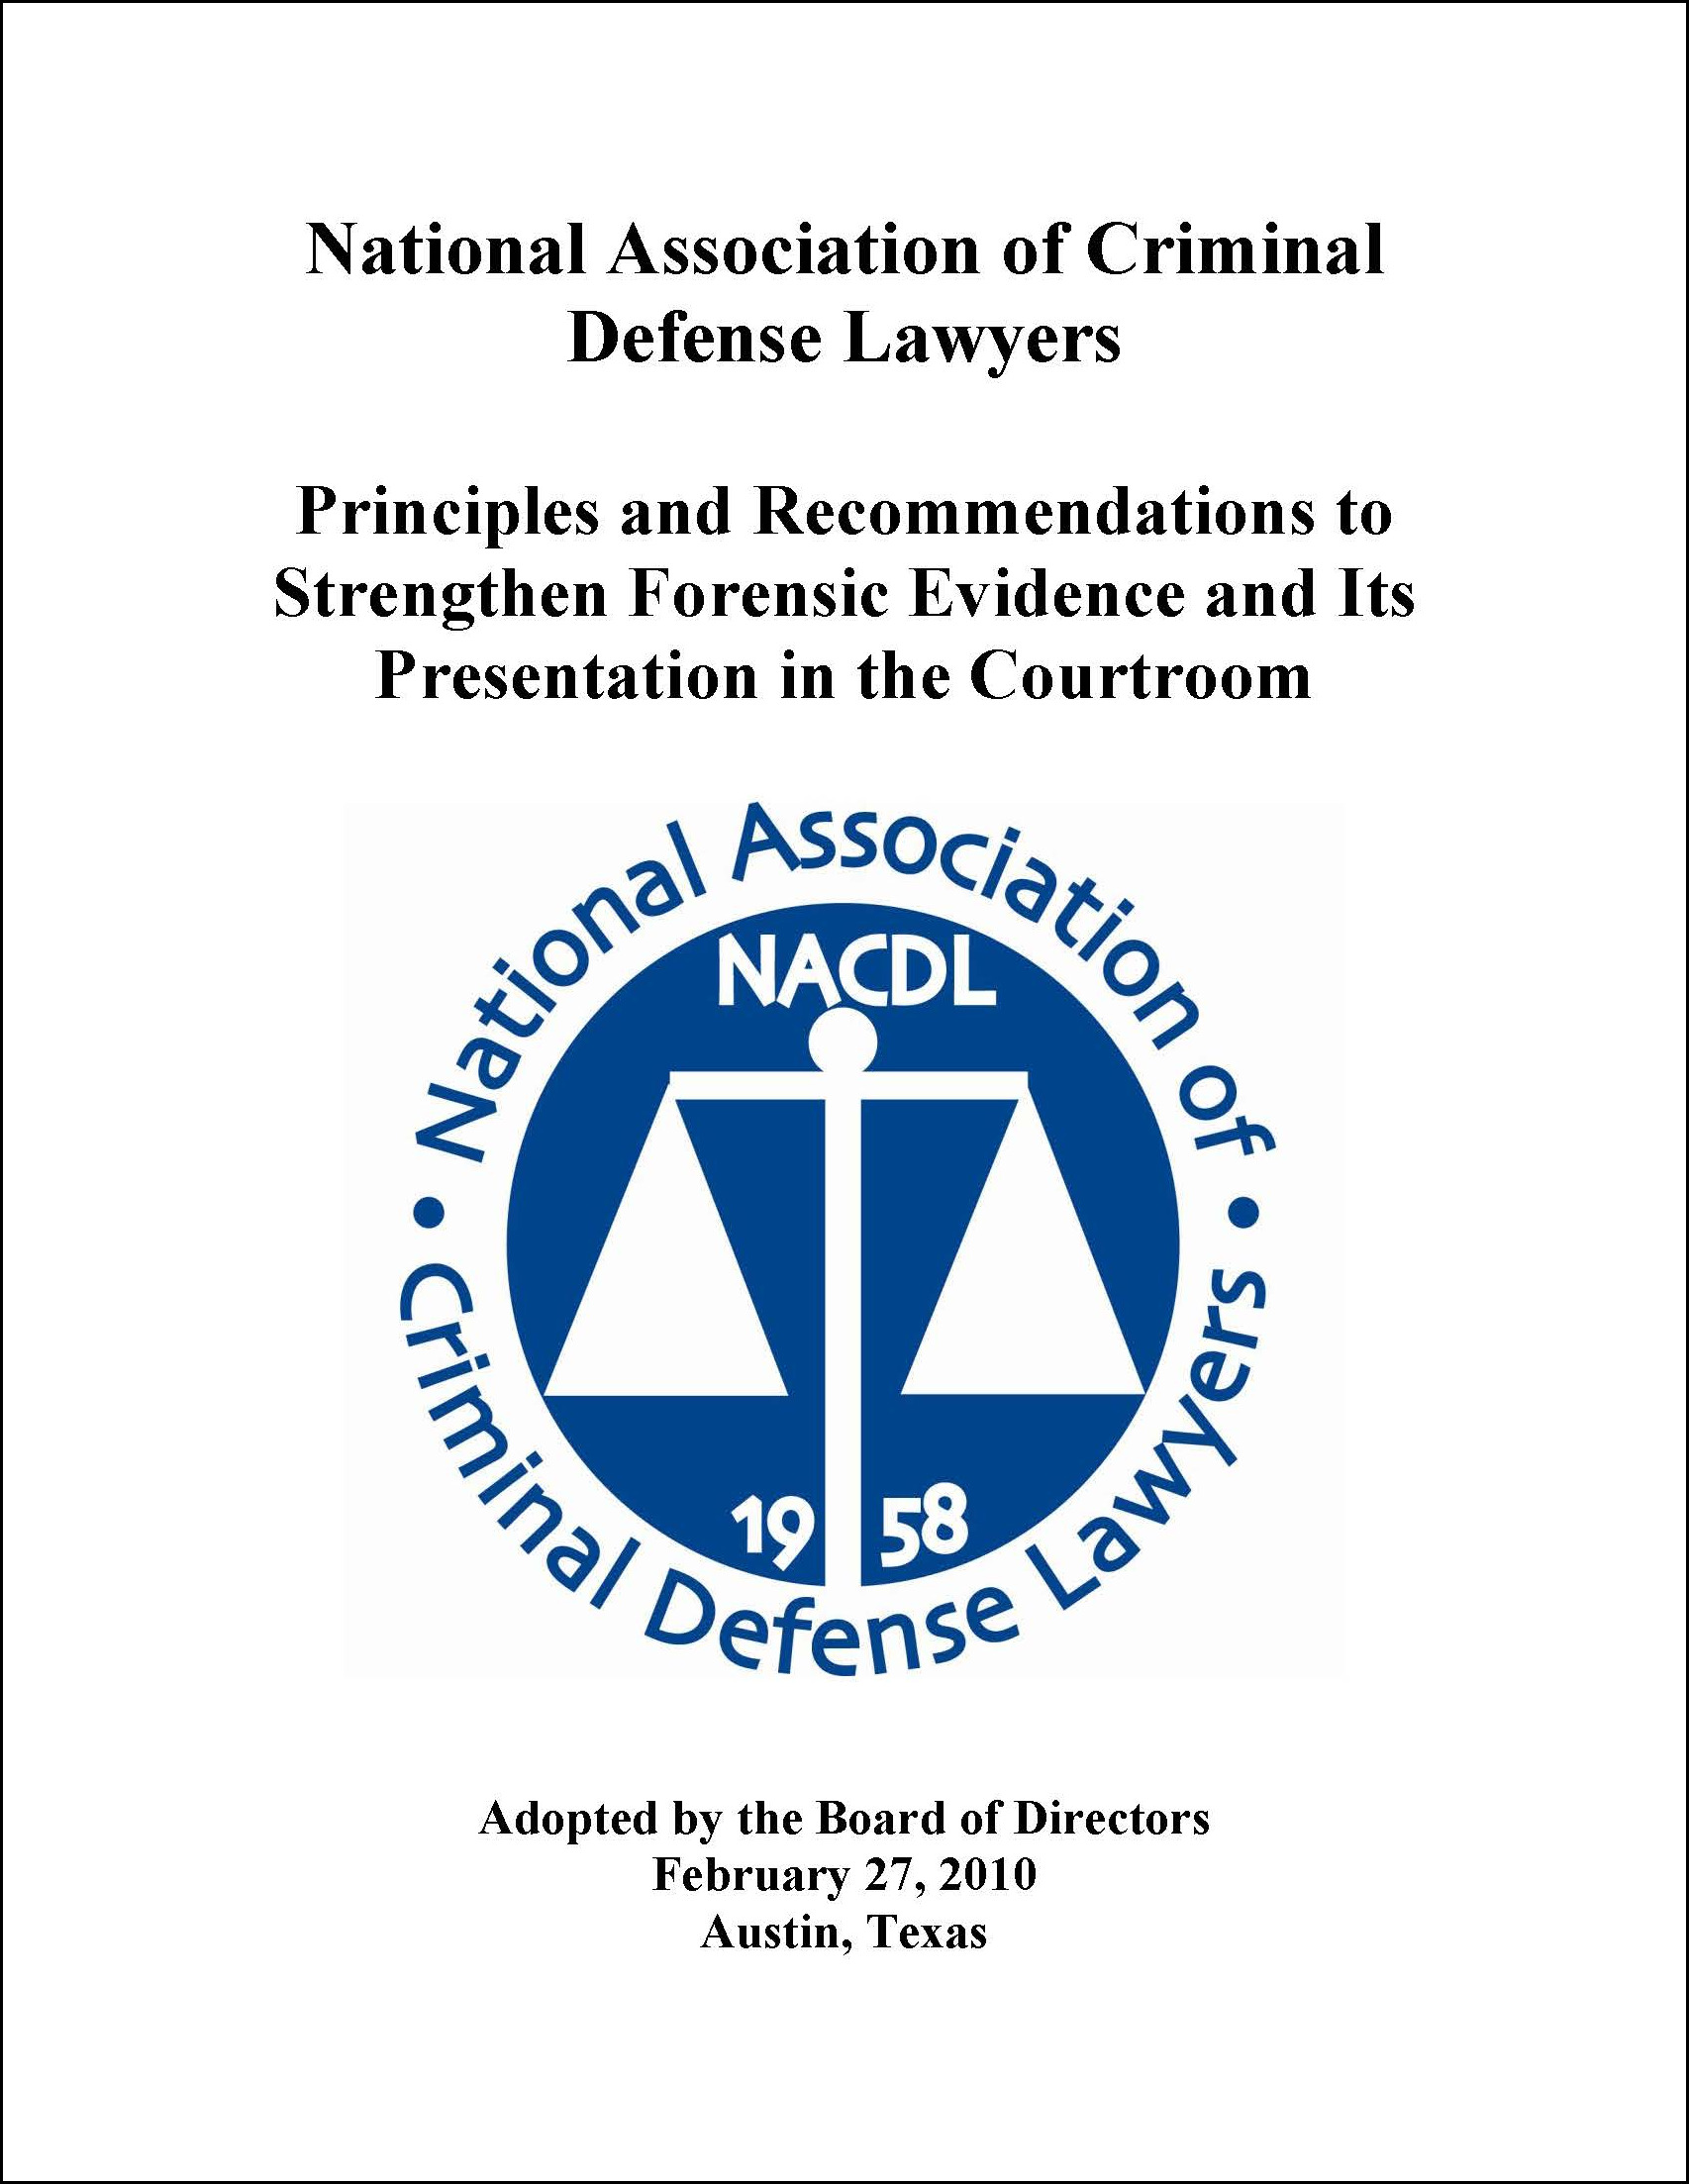 Cover for NACDL report Principles and Recommendations for Strengthening Forensic Science in the Courtroom